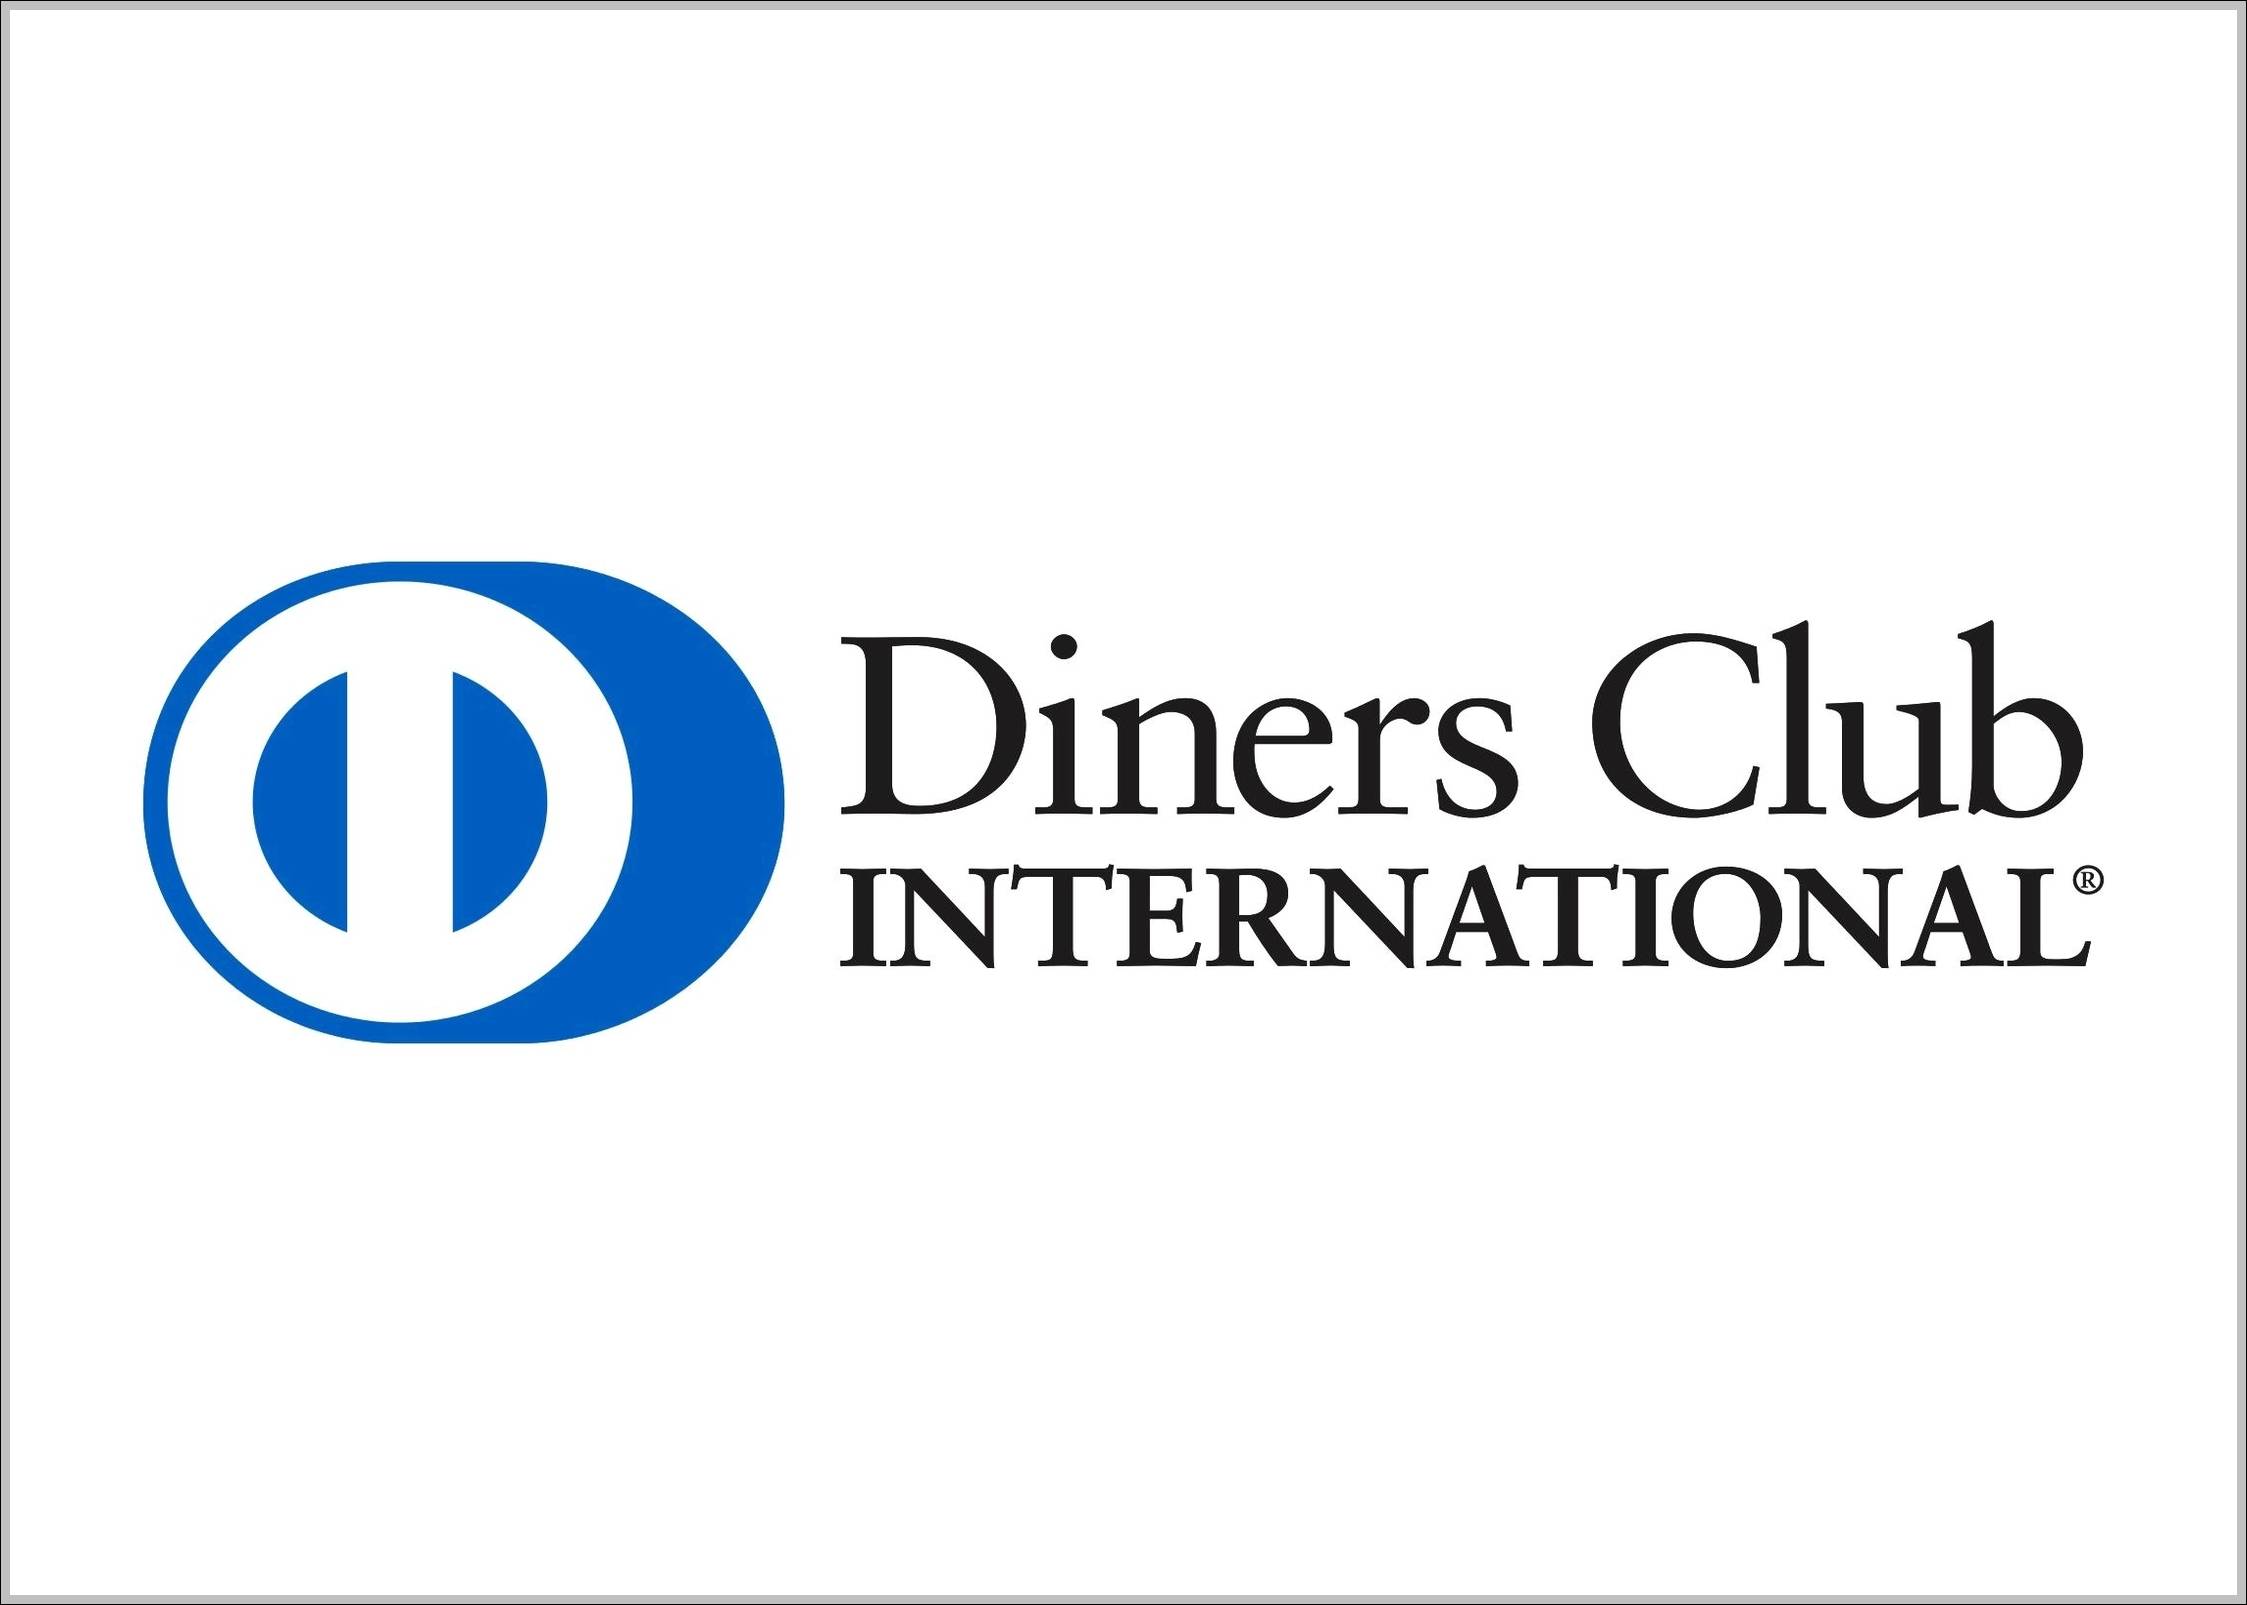 Diners Club logo and sign